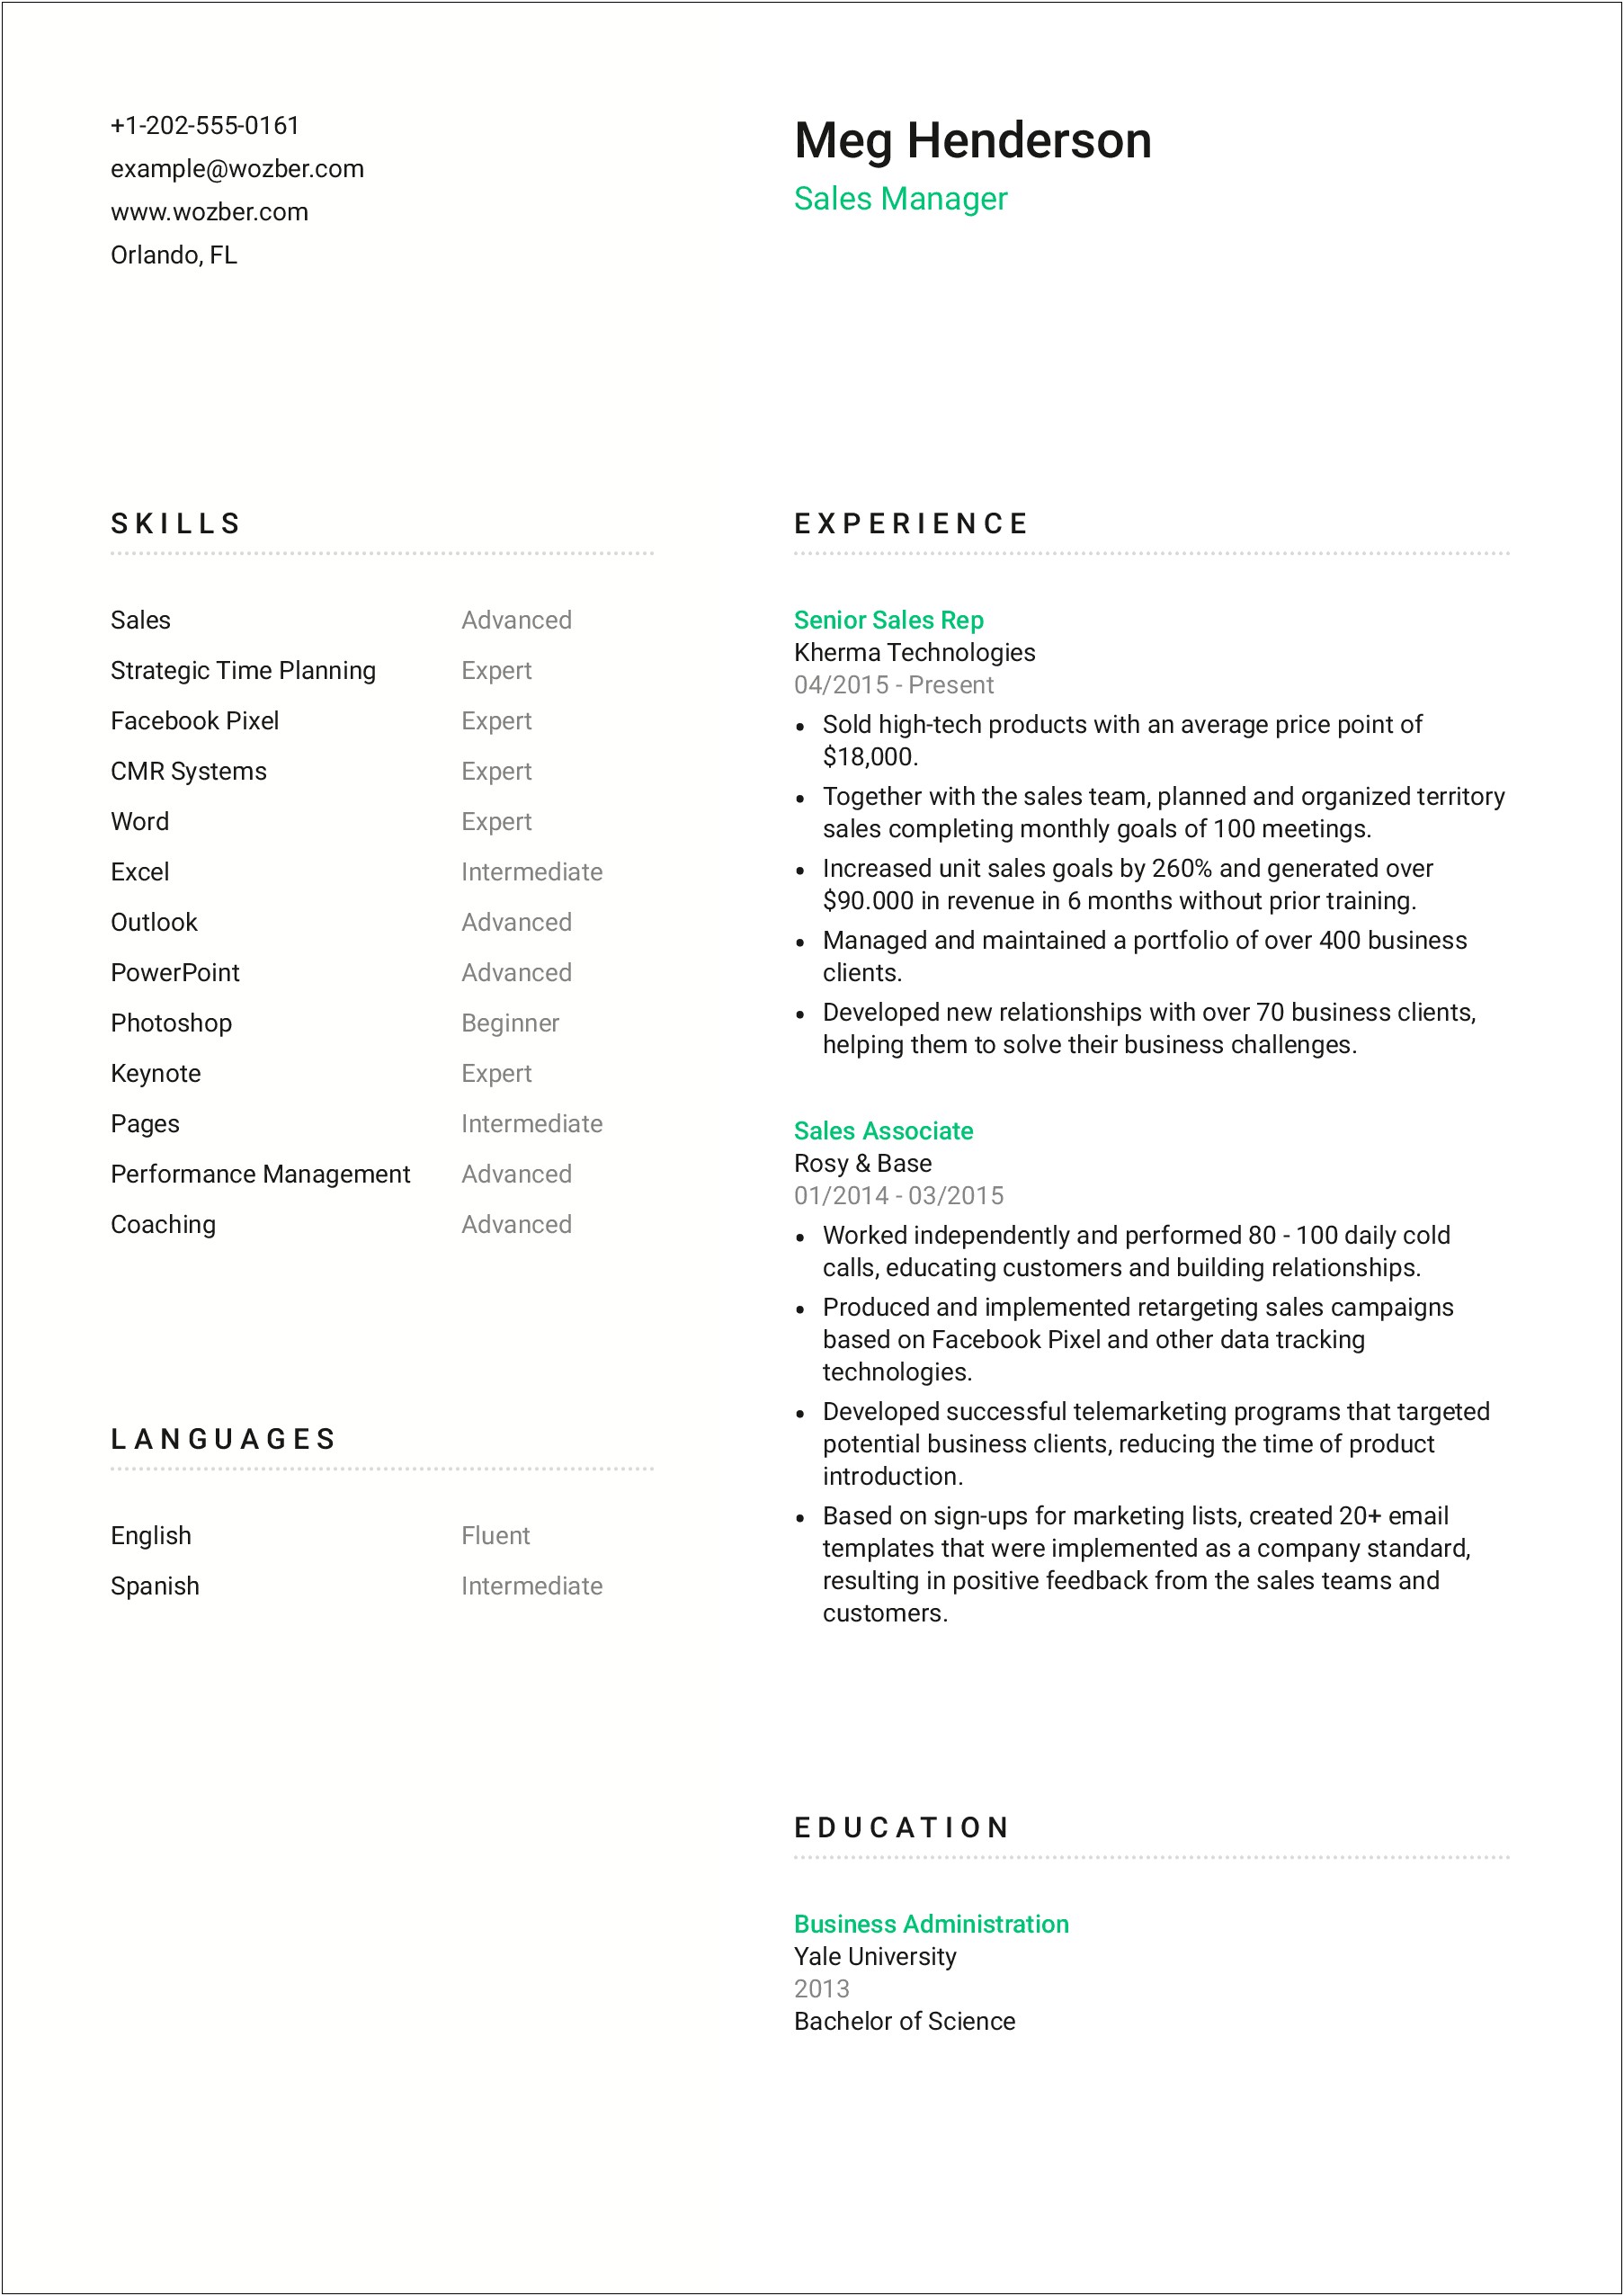 Sample Resume Format For Experienced Sales Manager